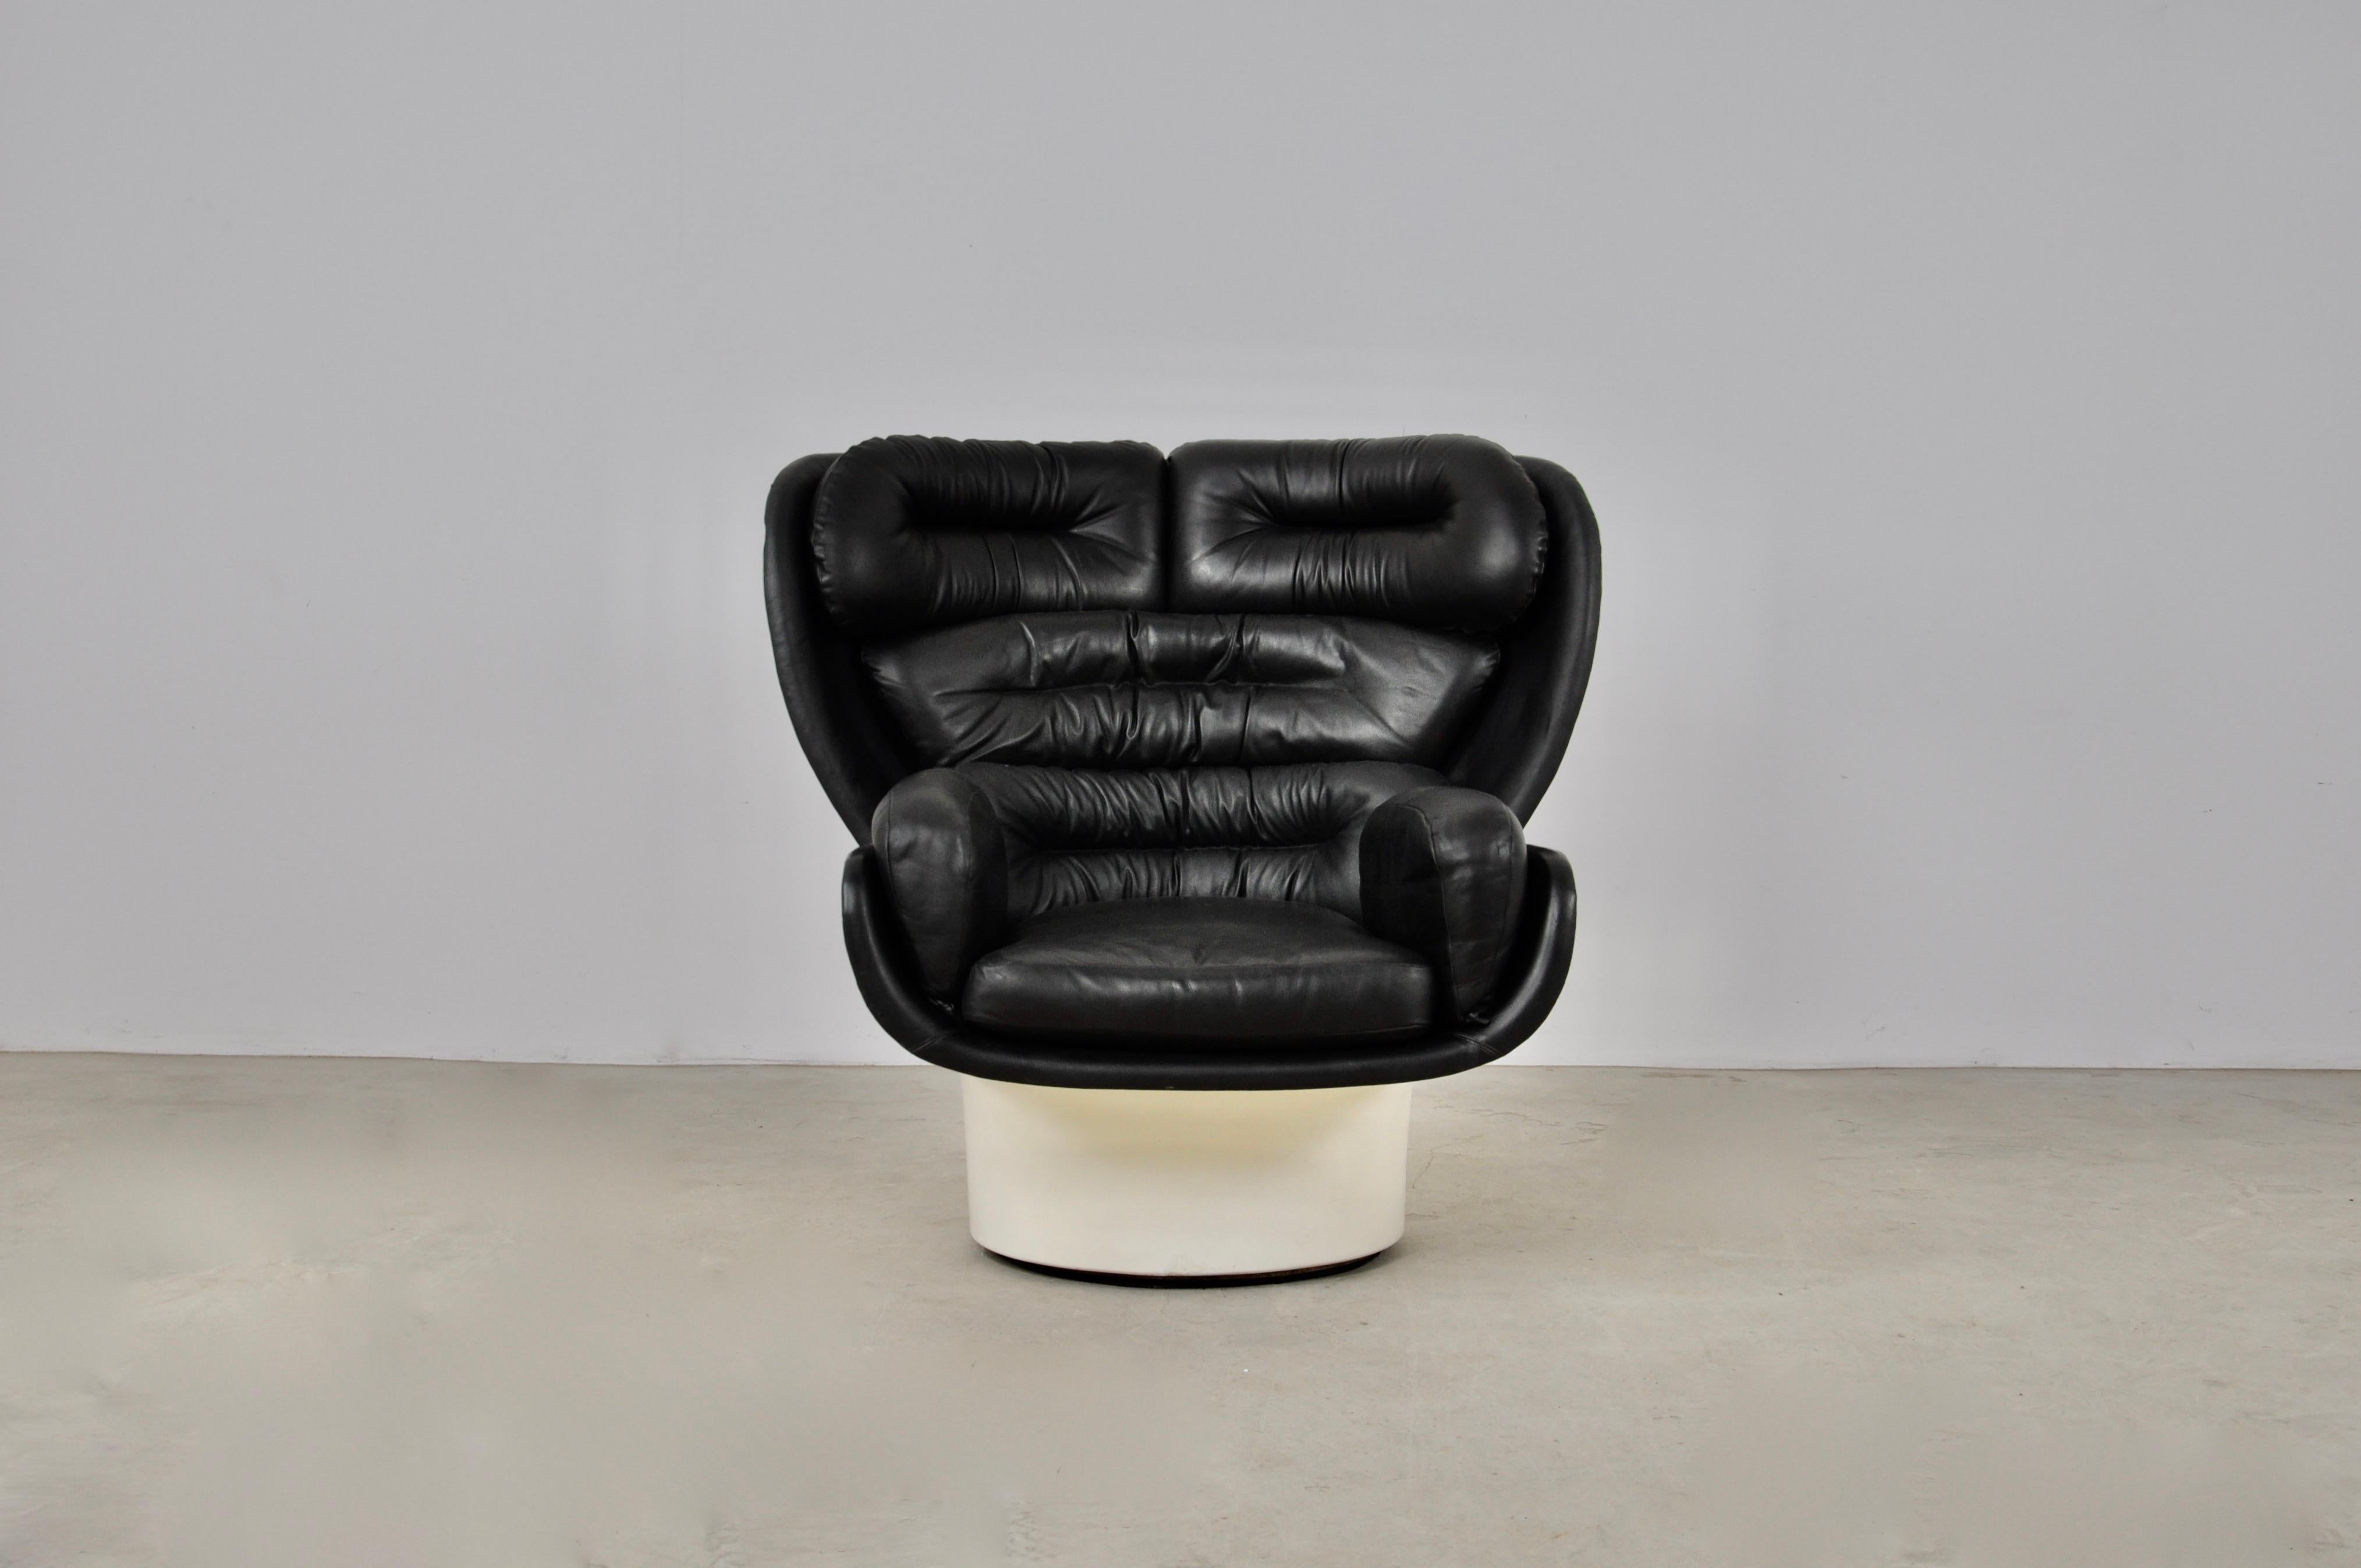 Fiberglass and leather armchair. Seat height: 39cm. Wear due to time and age of the chairs.